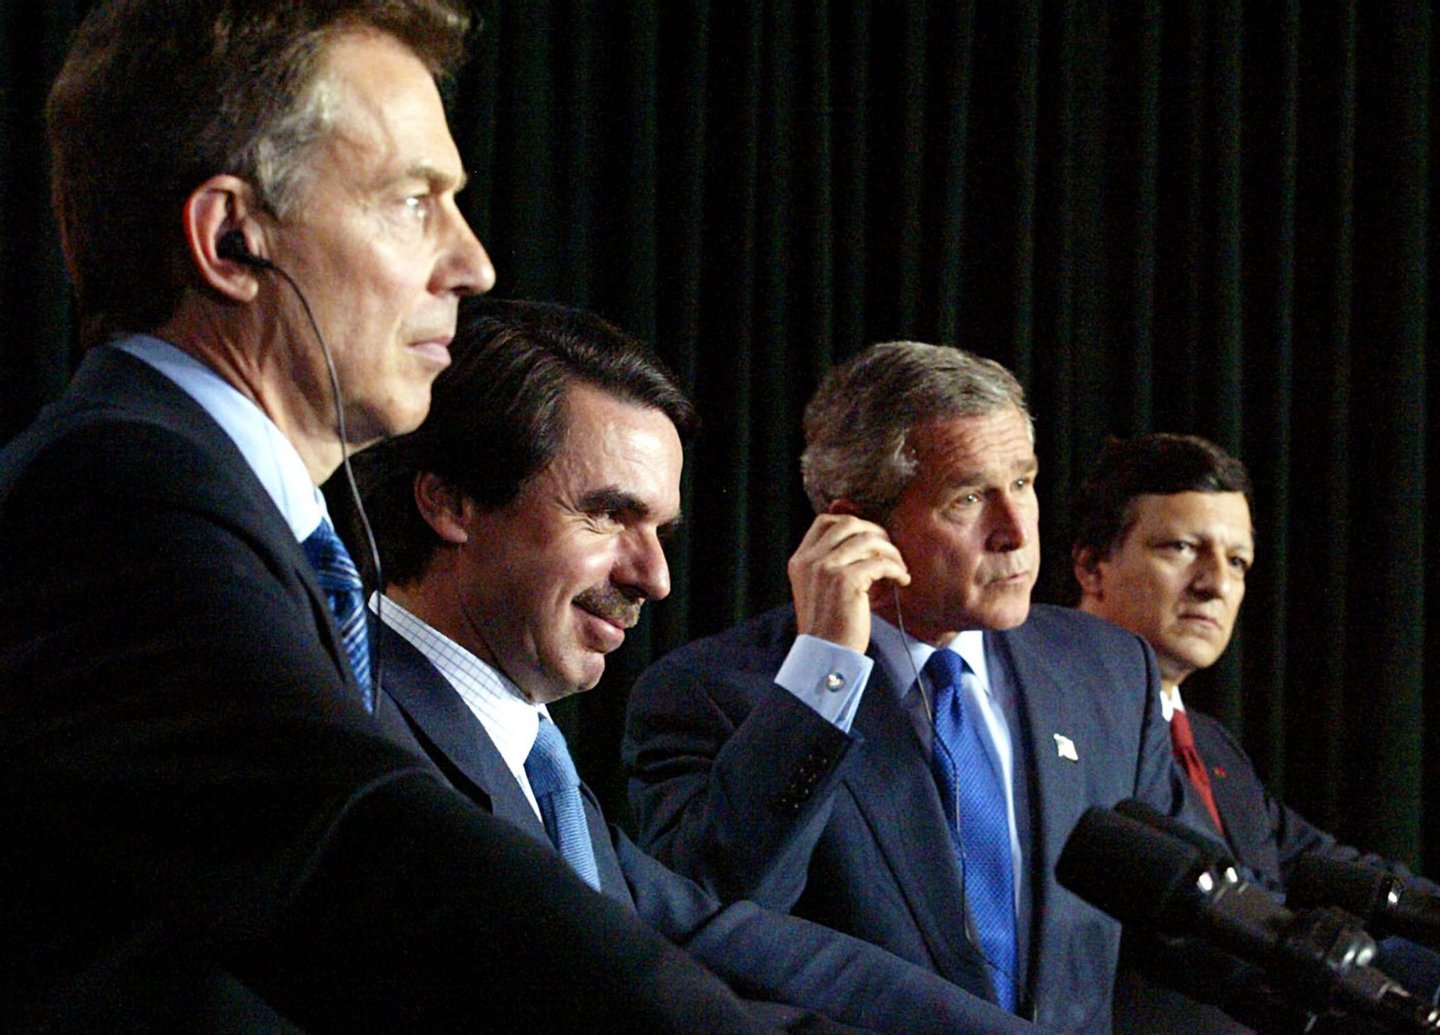 (L-R) Britain's Prime Minister Tony Blair, Spanish Prime Minister Jose Maria Aznar, US President George W. Bush and Portuguese Prime Minister Jose Manuel Durao Barosso listen at their joint press conference following meetings to discuss prospects for resolving the Iraq situation peacefully with diplomacy in final pursuit of a United Nations resolution 16 March, 2003, at Lajes Field on the island of Terceira in the Azores, Portugal. The four leaders, all facing anti-war opposition of varying degrees at home are the sponsors of a UN resolution that would set the stage for war on Iraq. (Photo by Luke FRAZZA/AFP/Getty Images)